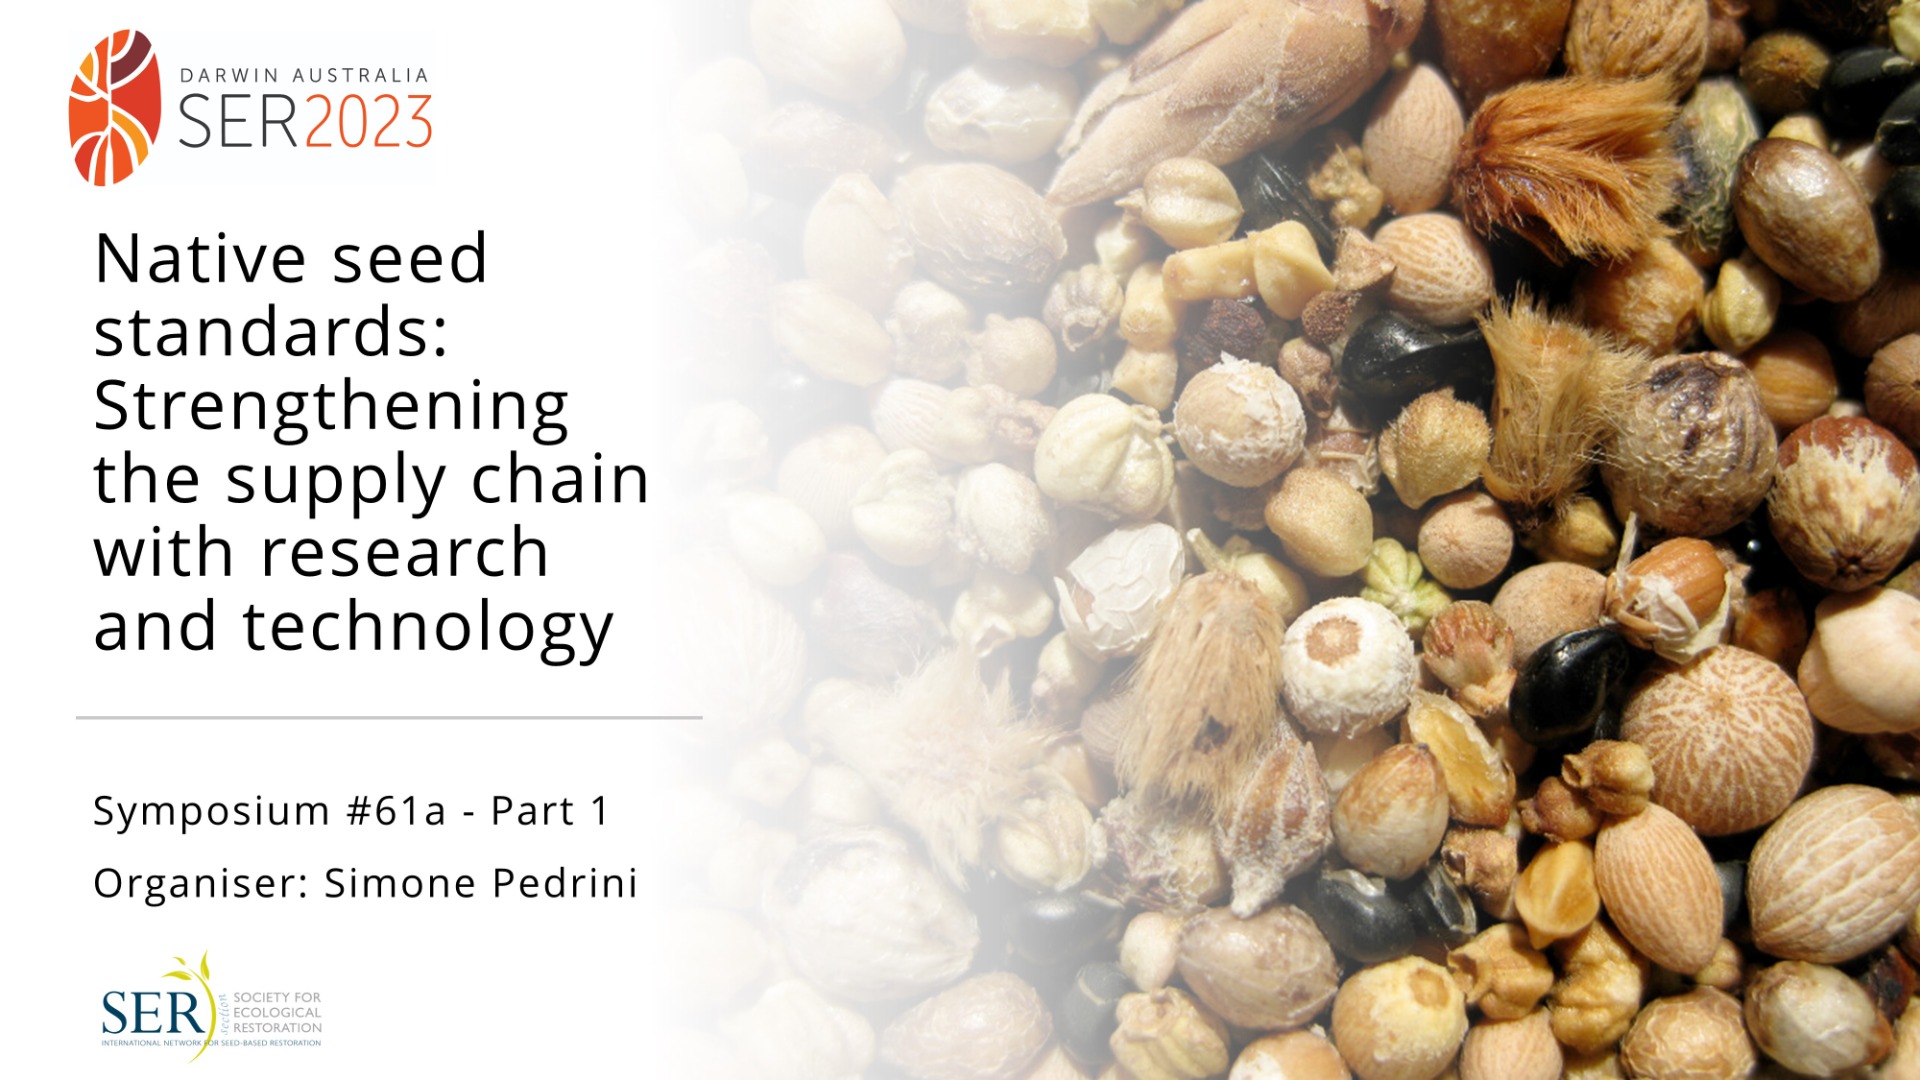 Symposium #61a Native seed standards: Strengthening the supply chain with research and technology - Part 1. Organiser: Simone Pedrini